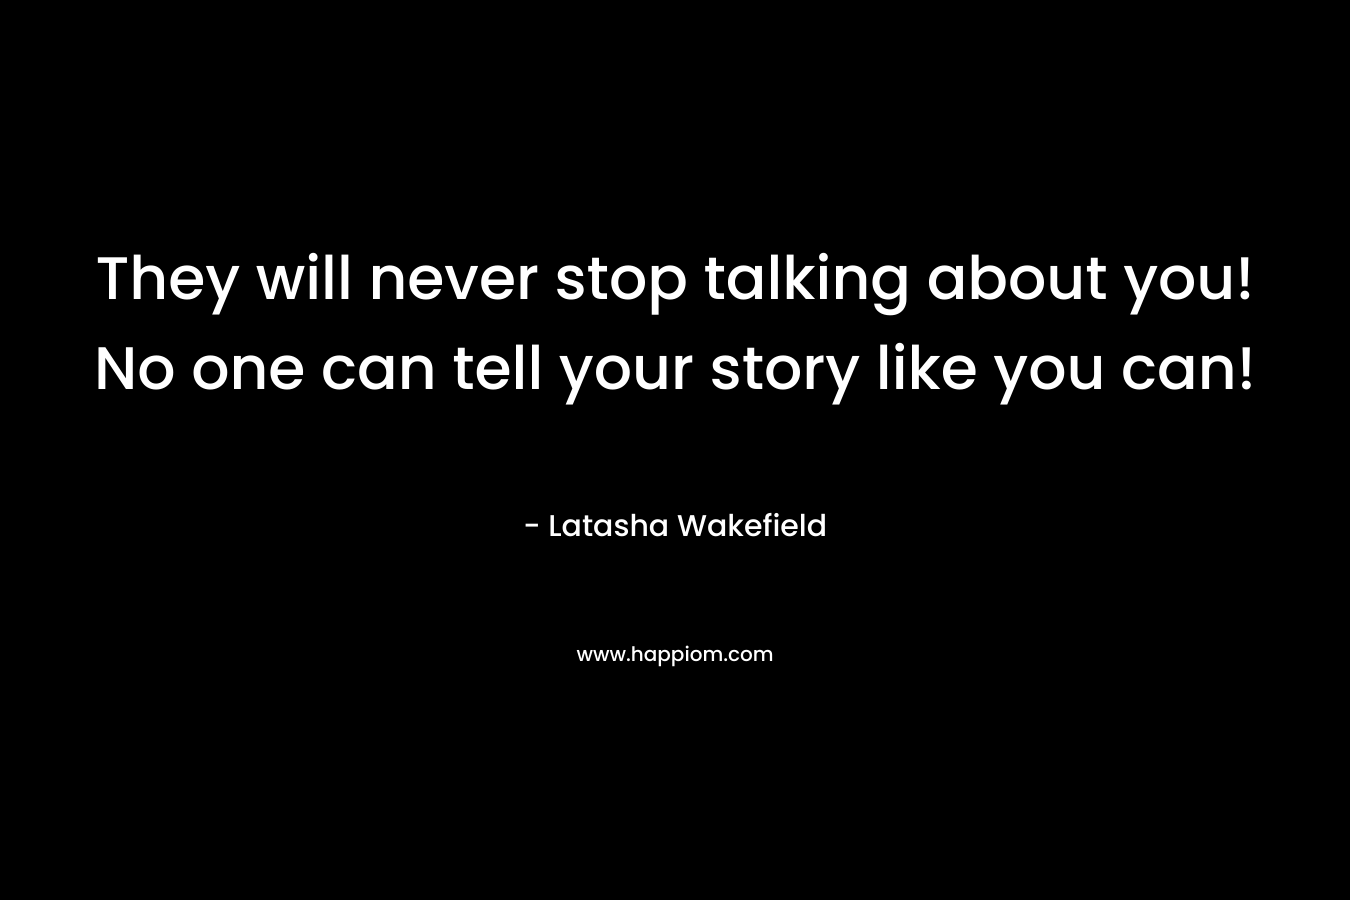 They will never stop talking about you! No one can tell your story like you can!